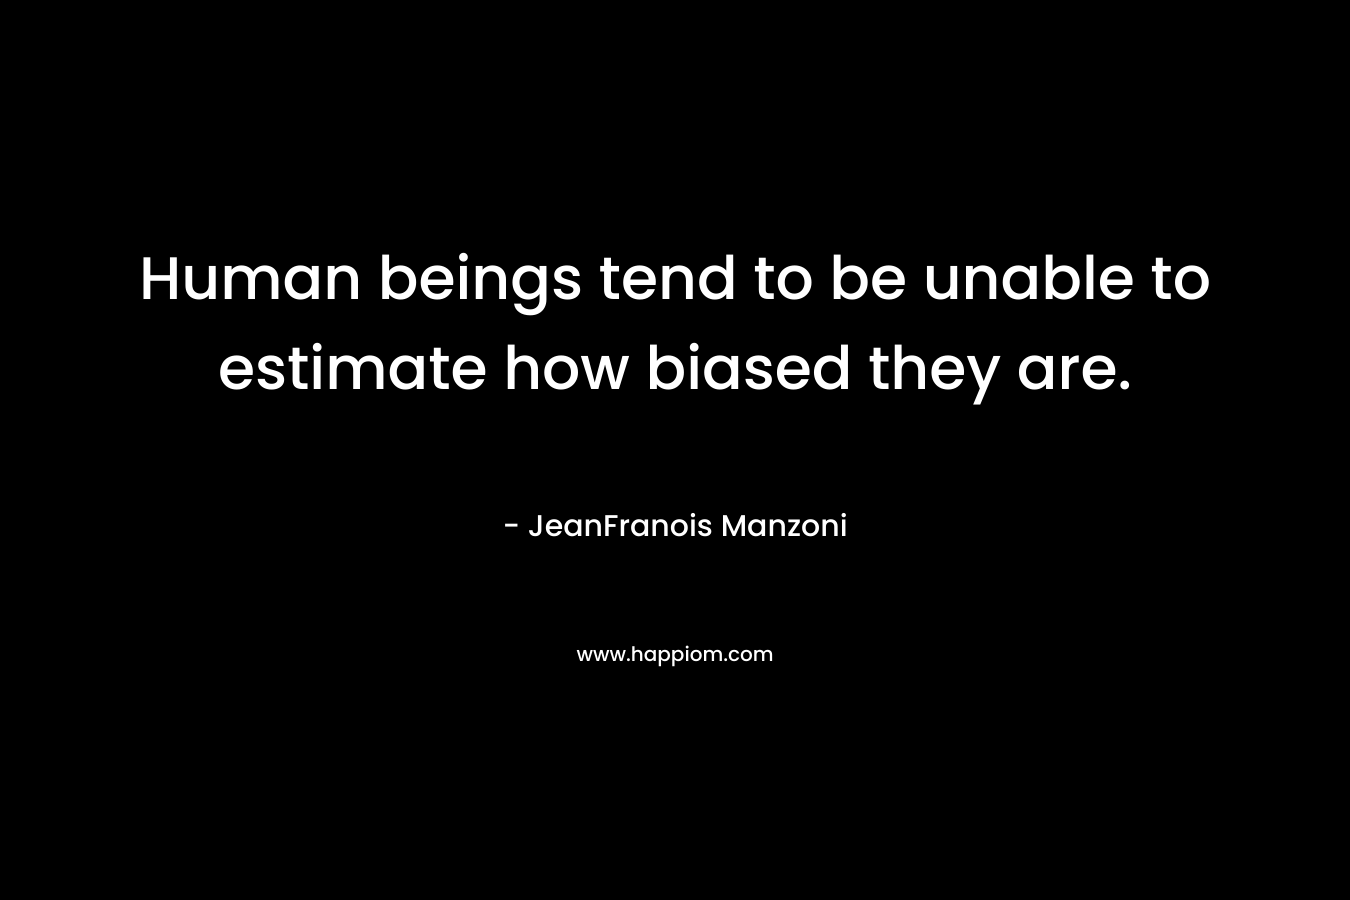 Human beings tend to be unable to estimate how biased they are. – JeanFranois Manzoni